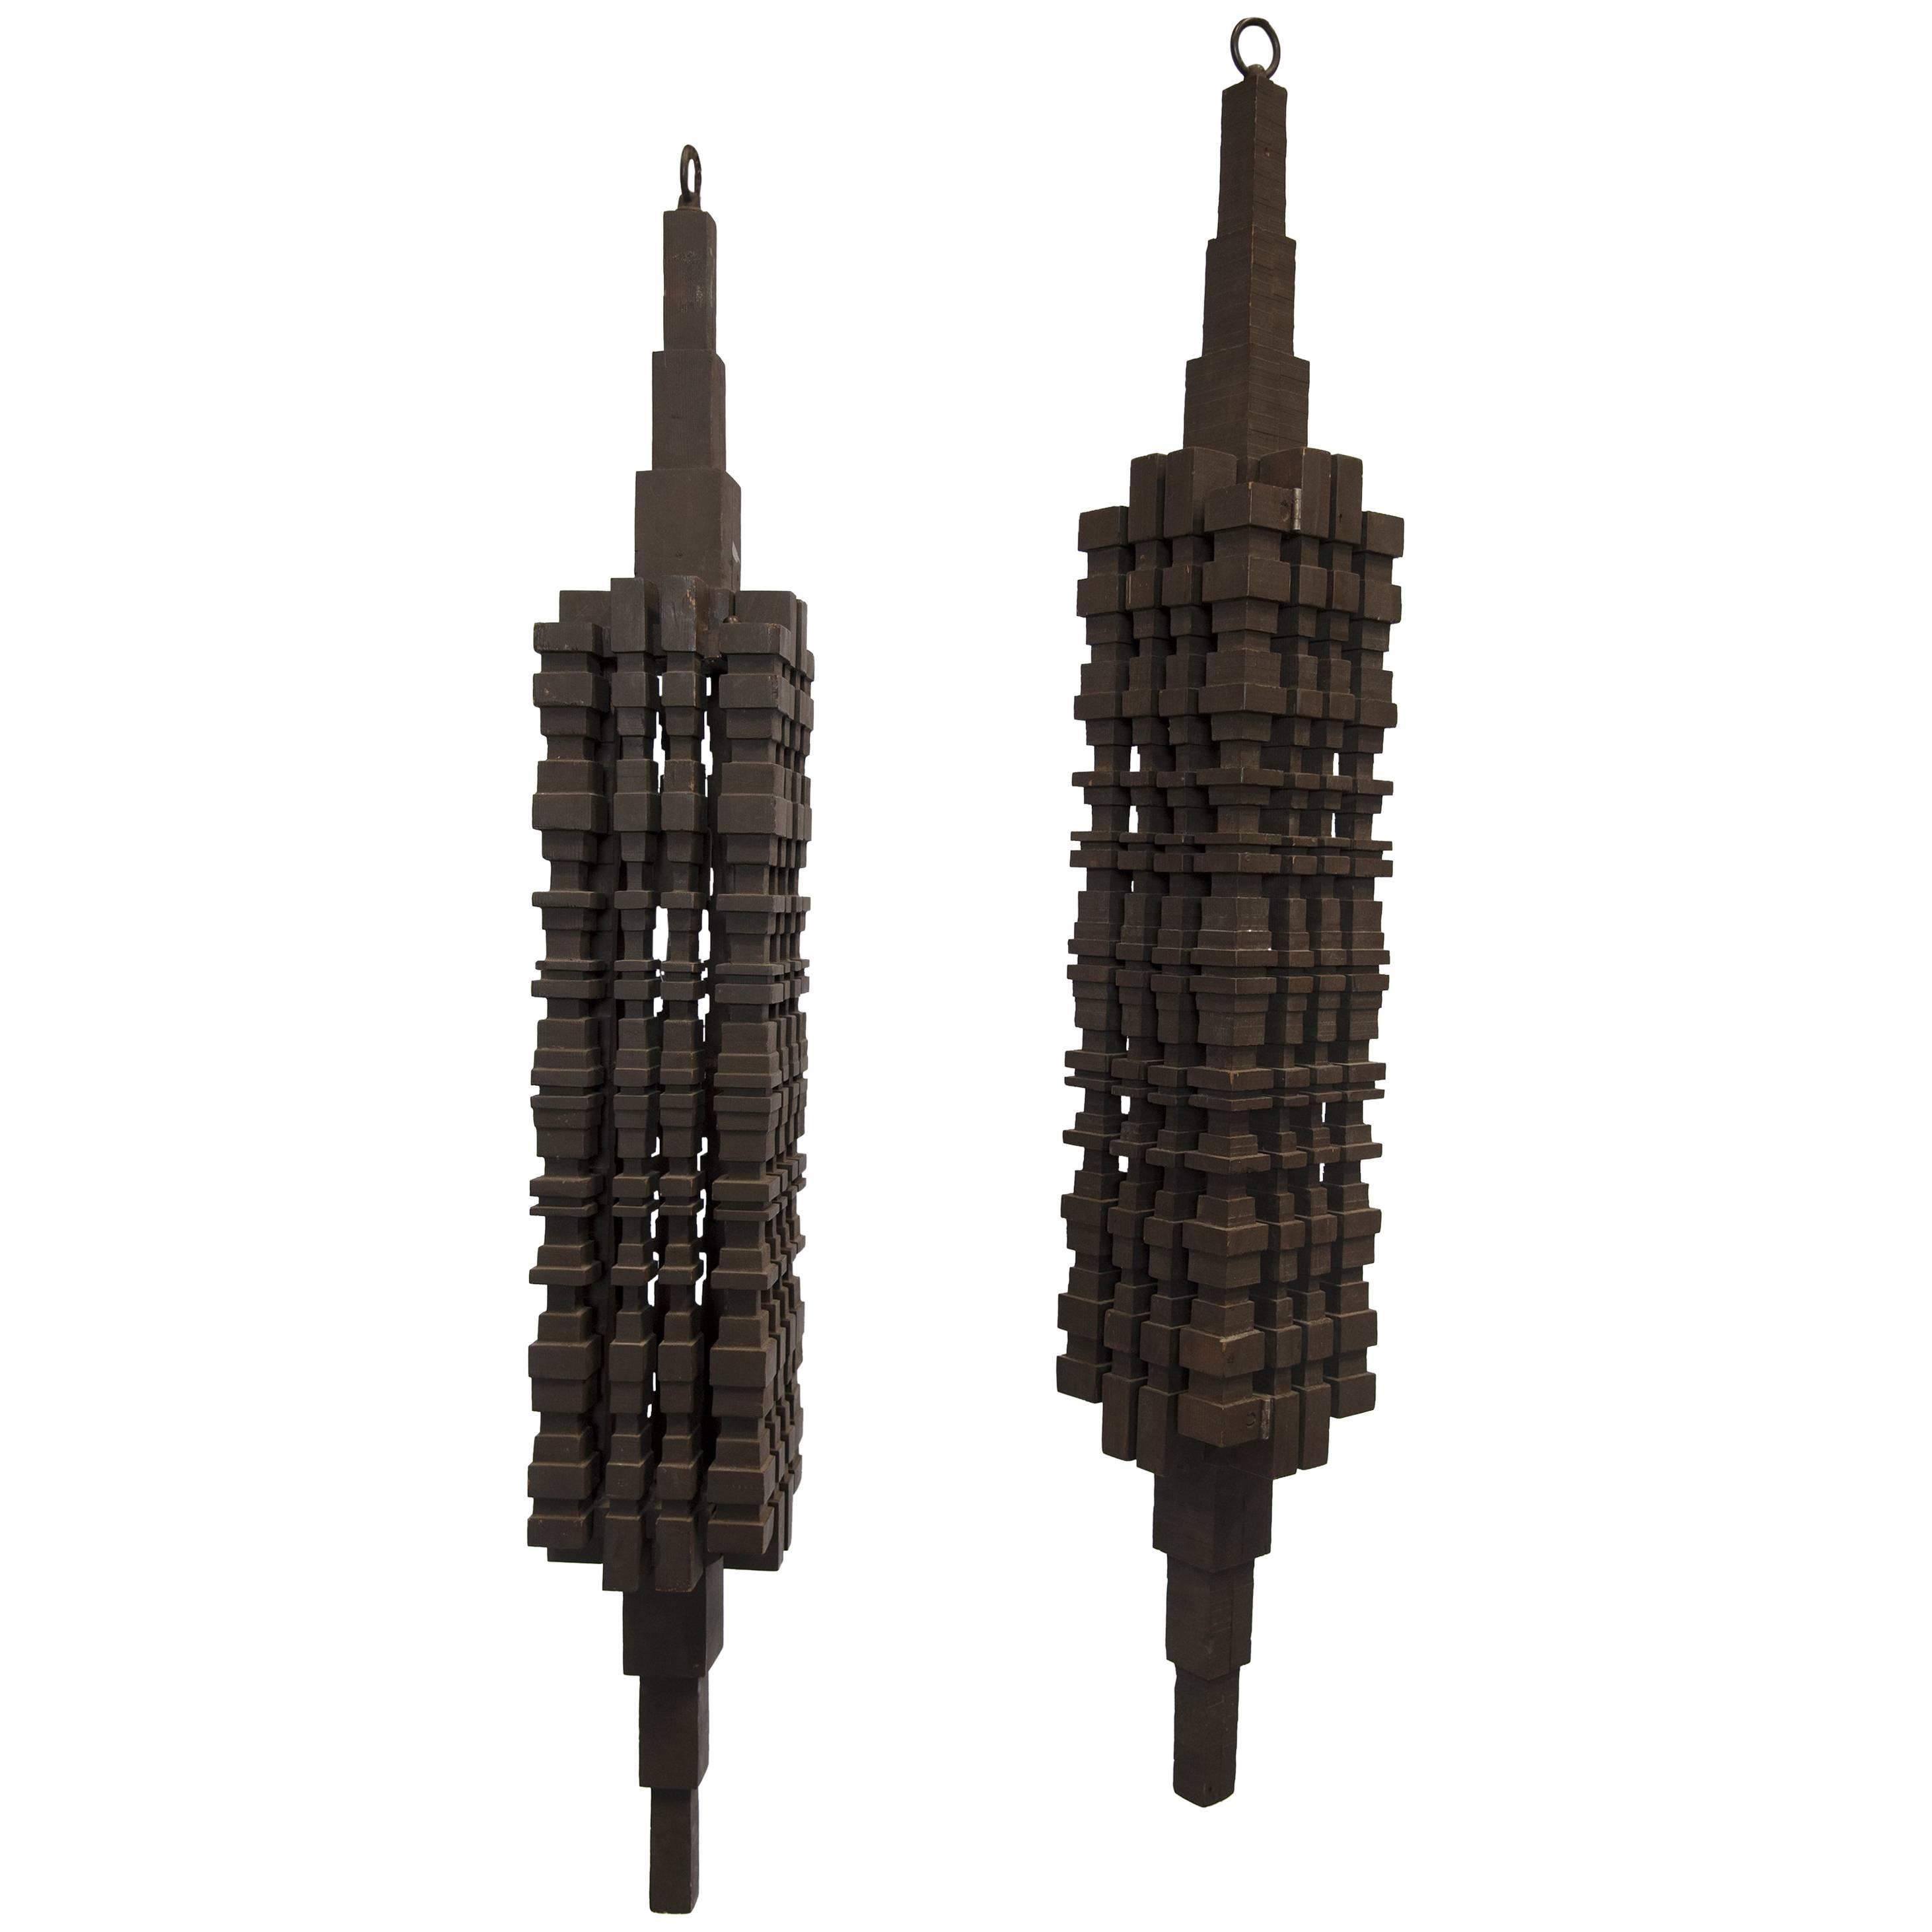  HAND-CARVED Wooden 1920's CHANDELIERS [PAIR]